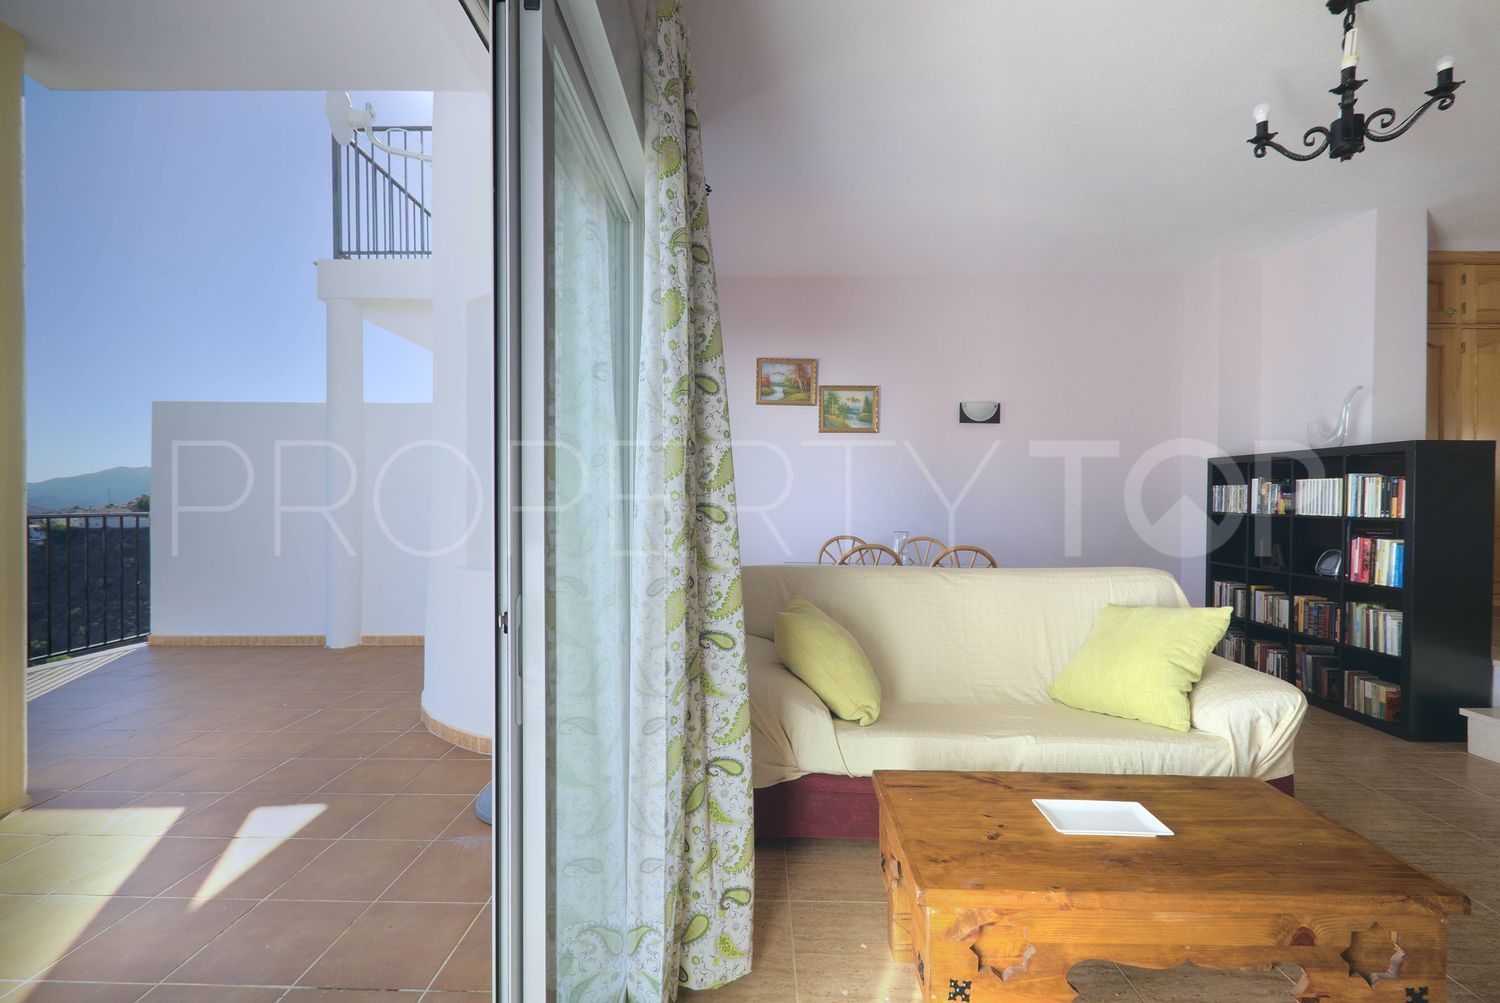 For sale house with 2 bedrooms in Viñuela